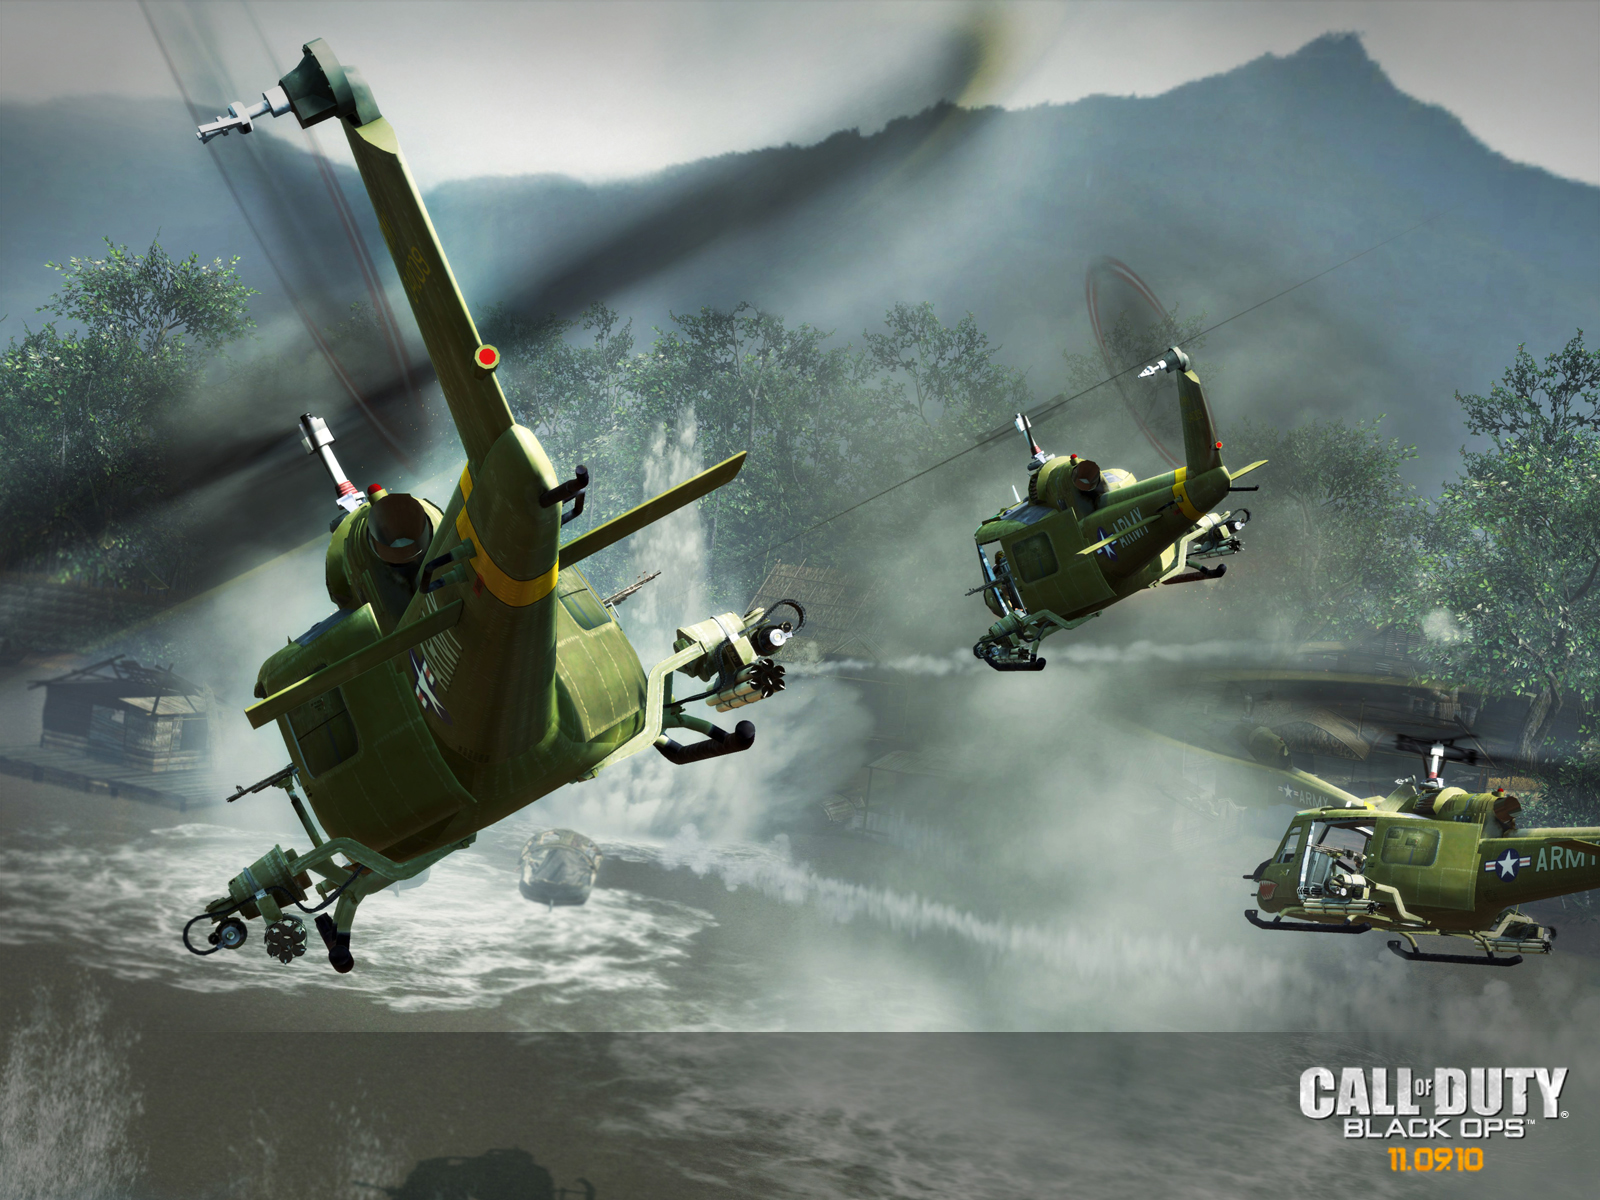 Wallpapers Call of duty black ops 1600x1200